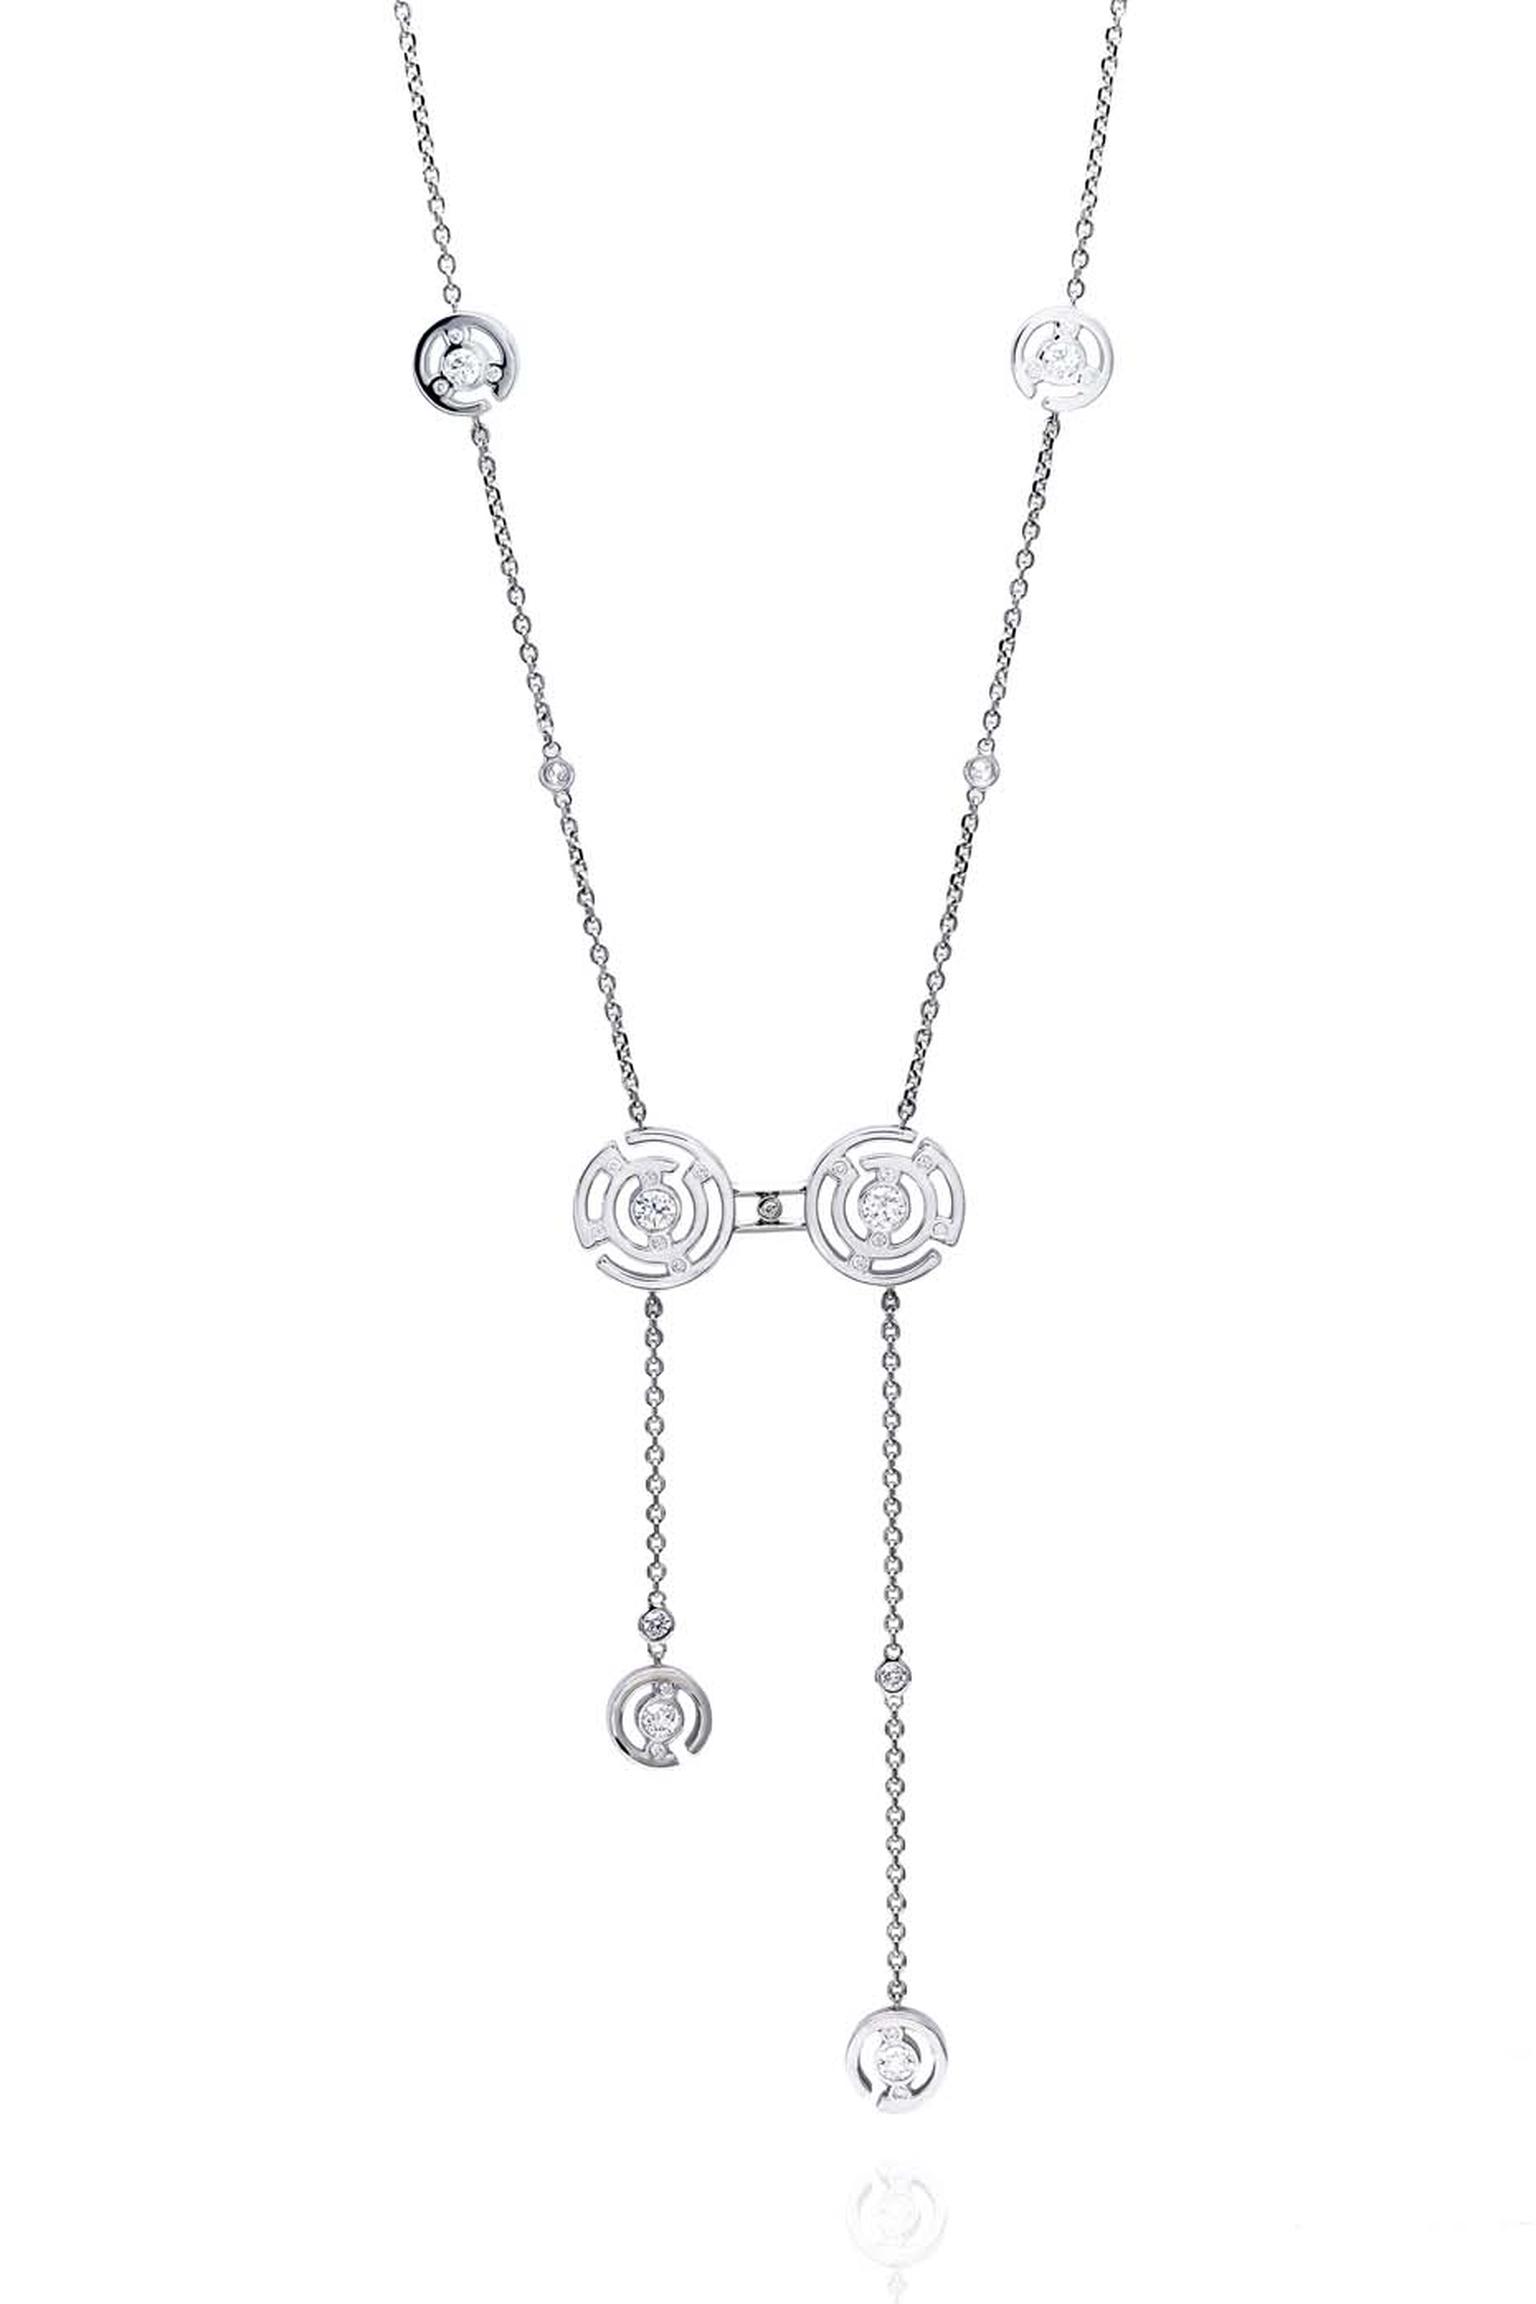 Boodles Maze collection diamond necklace in white gold.